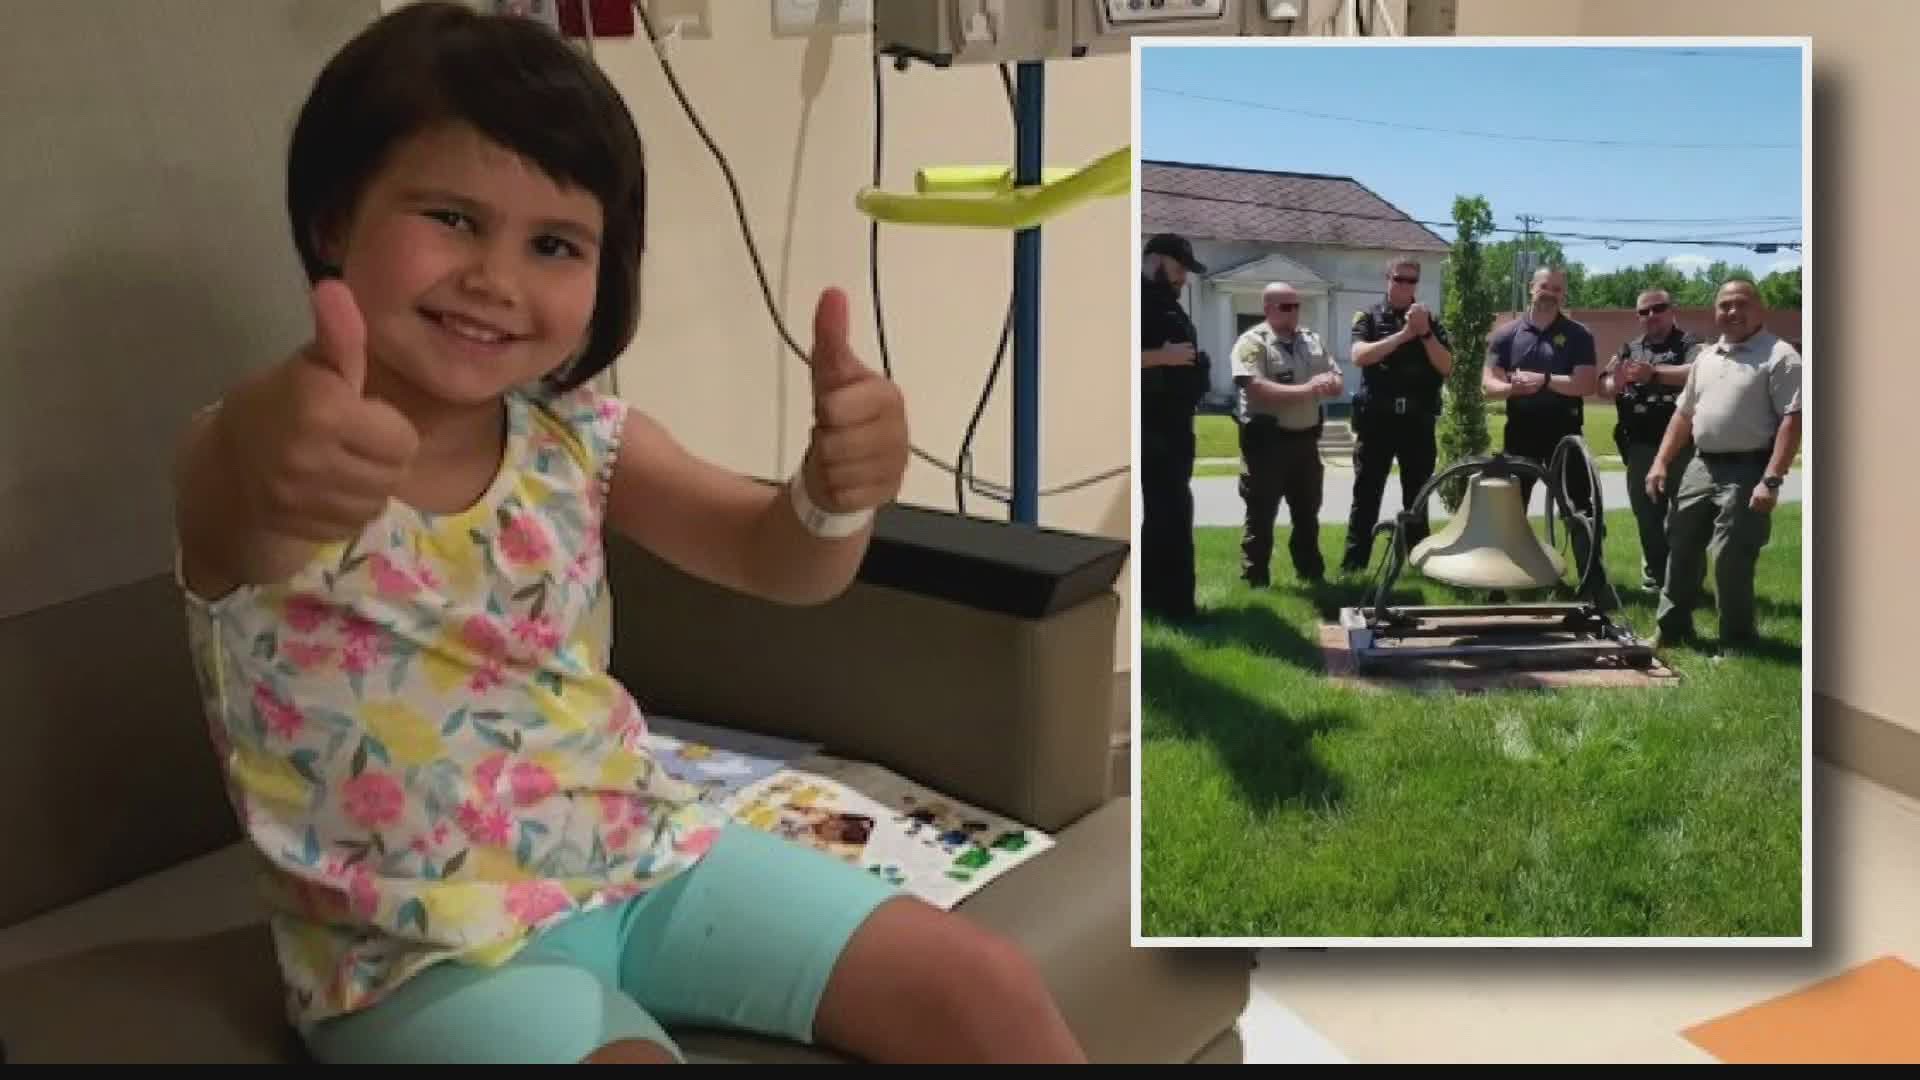 The 6-year-old girl recently completed chemotherapy treatments.